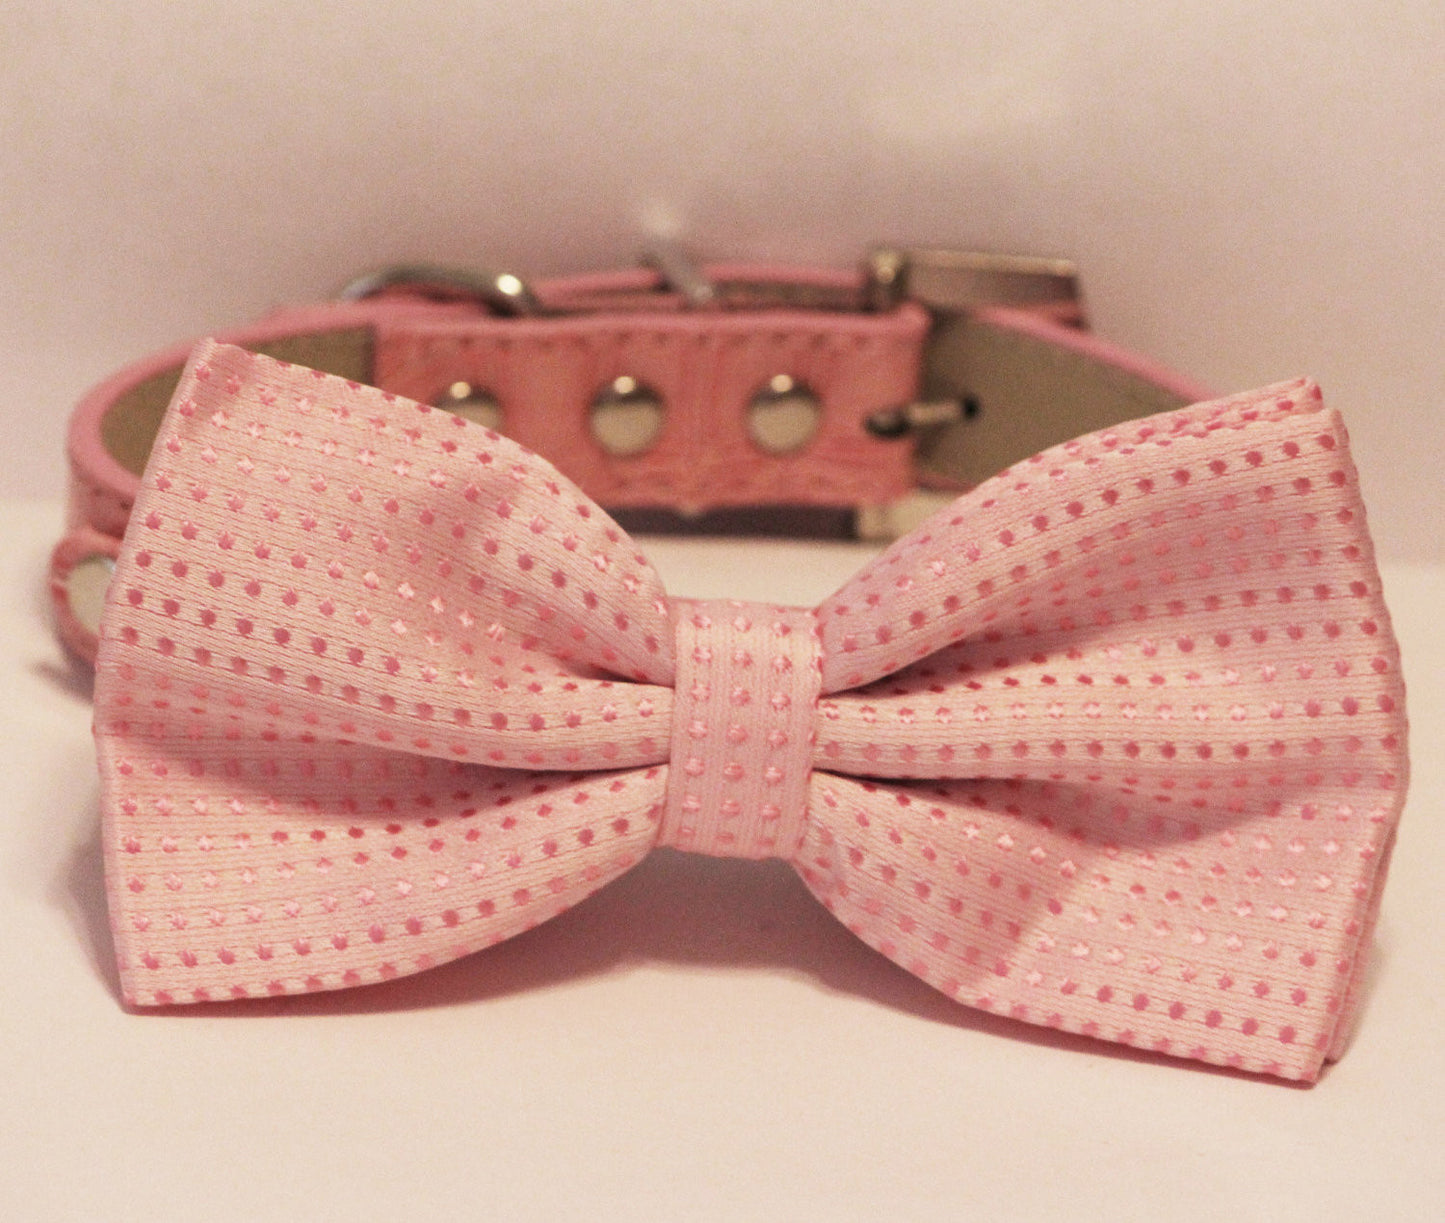 Pink Dog Bow Tie attached to Pink leather collar, Rhinestone Buckle, Cute,Love Pink, Pet Birthday Accessory , Wedding dog collar